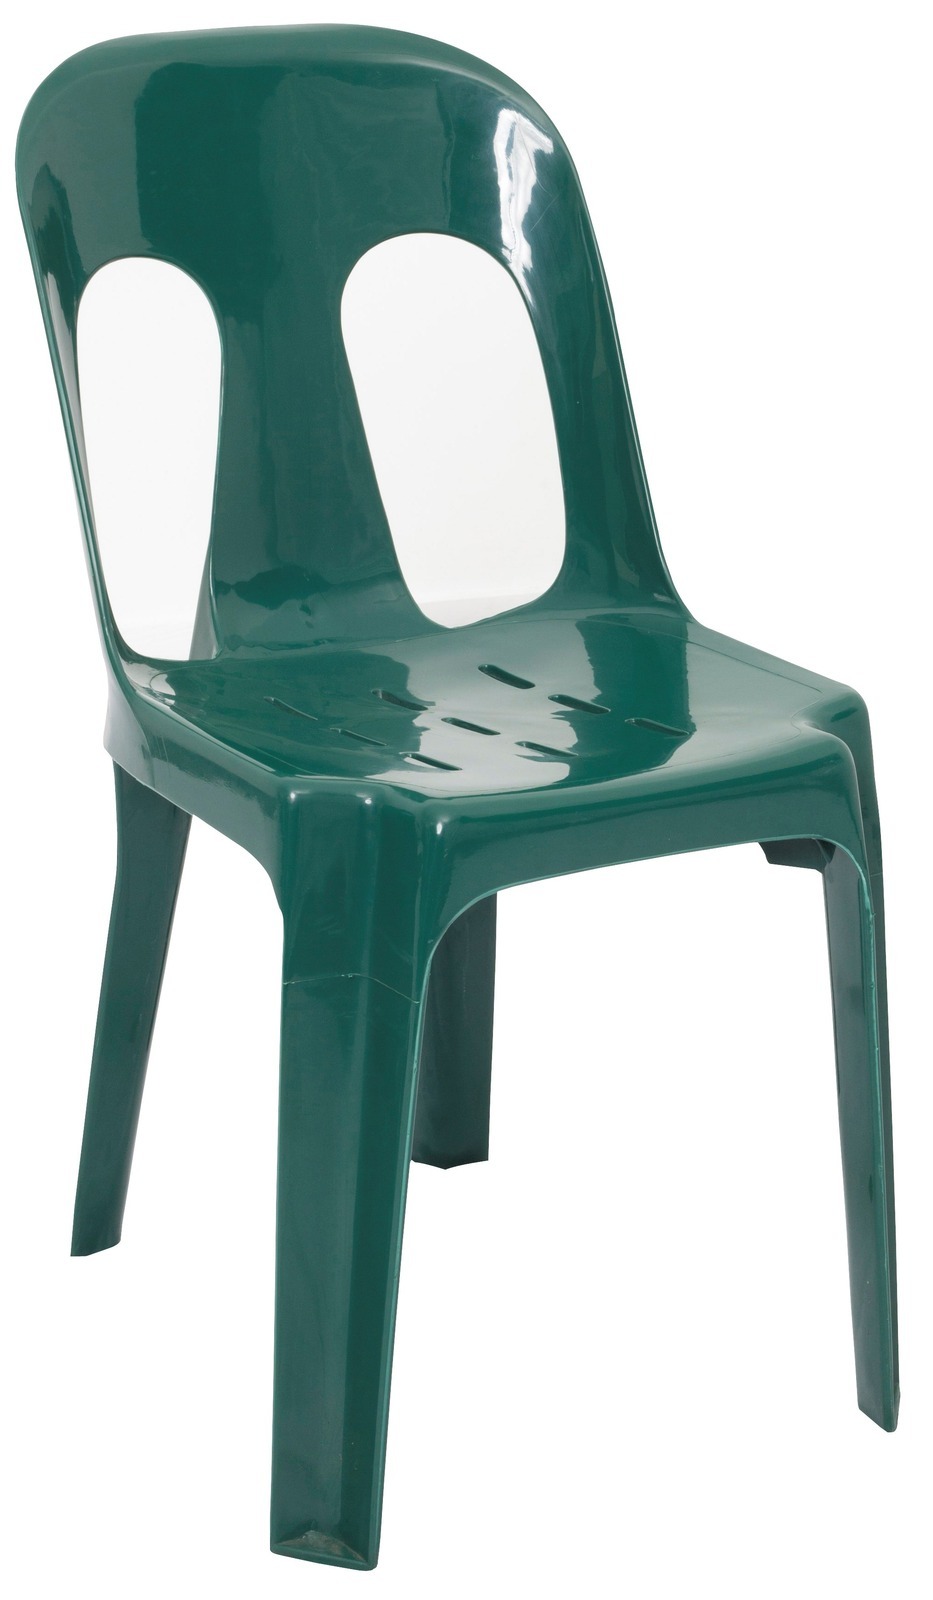 Pipee Stacking Plastic Chair Office Stock